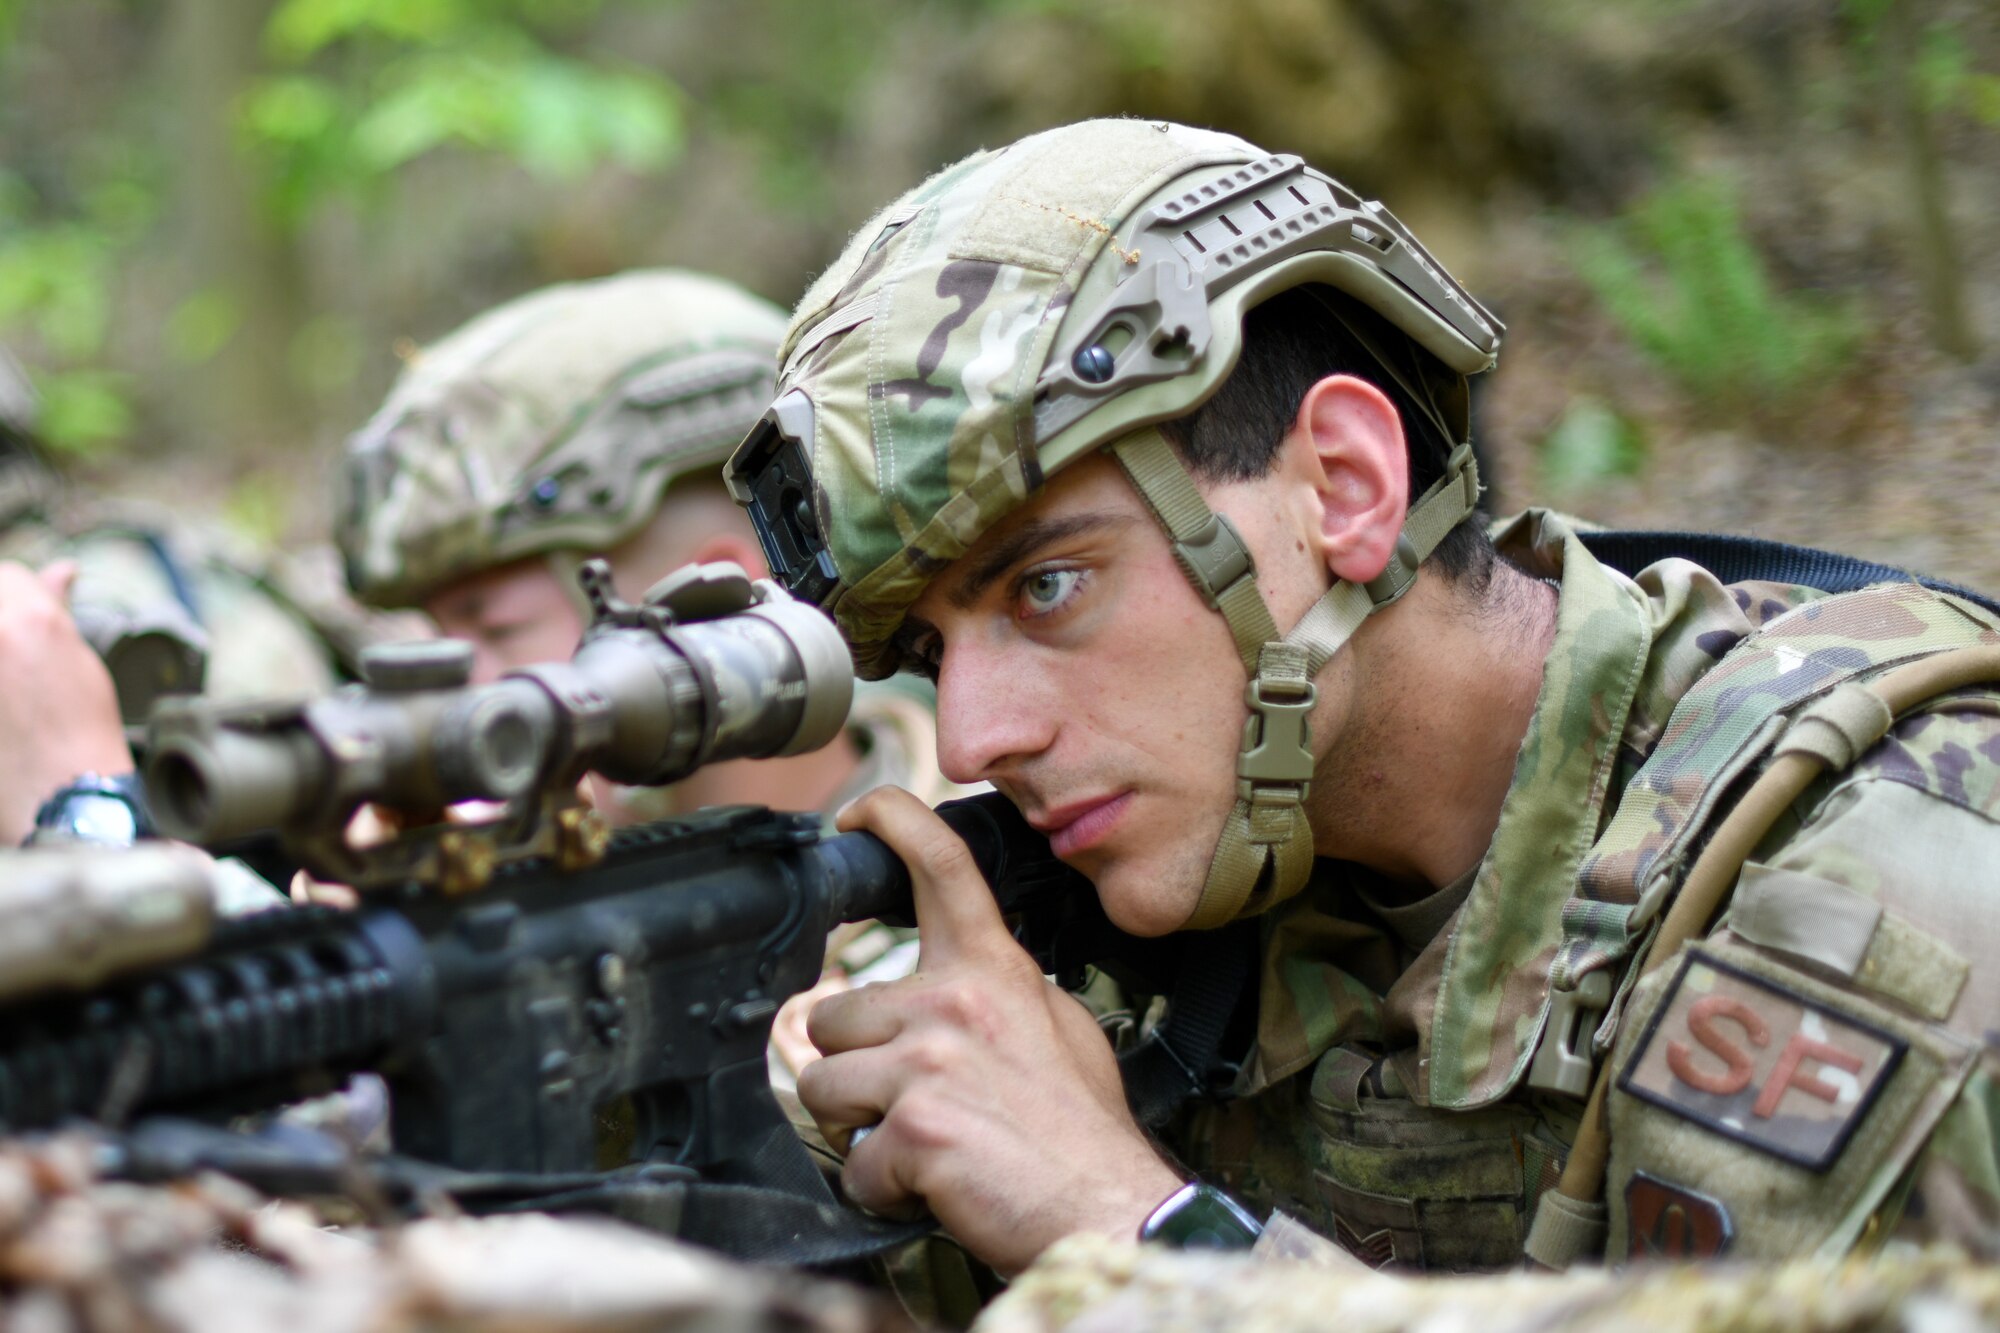 Airman First Class Francesco Kleinlercher, a member of the 439th Security Forces Squadron, Westover Air Reserve Base, Massachusetts, scans his surroundings using his M4 carbine’s scope during a static defense exercise, May 19, 2023, at Camp James A. Garfield Joint Military Training Center, Ohio.